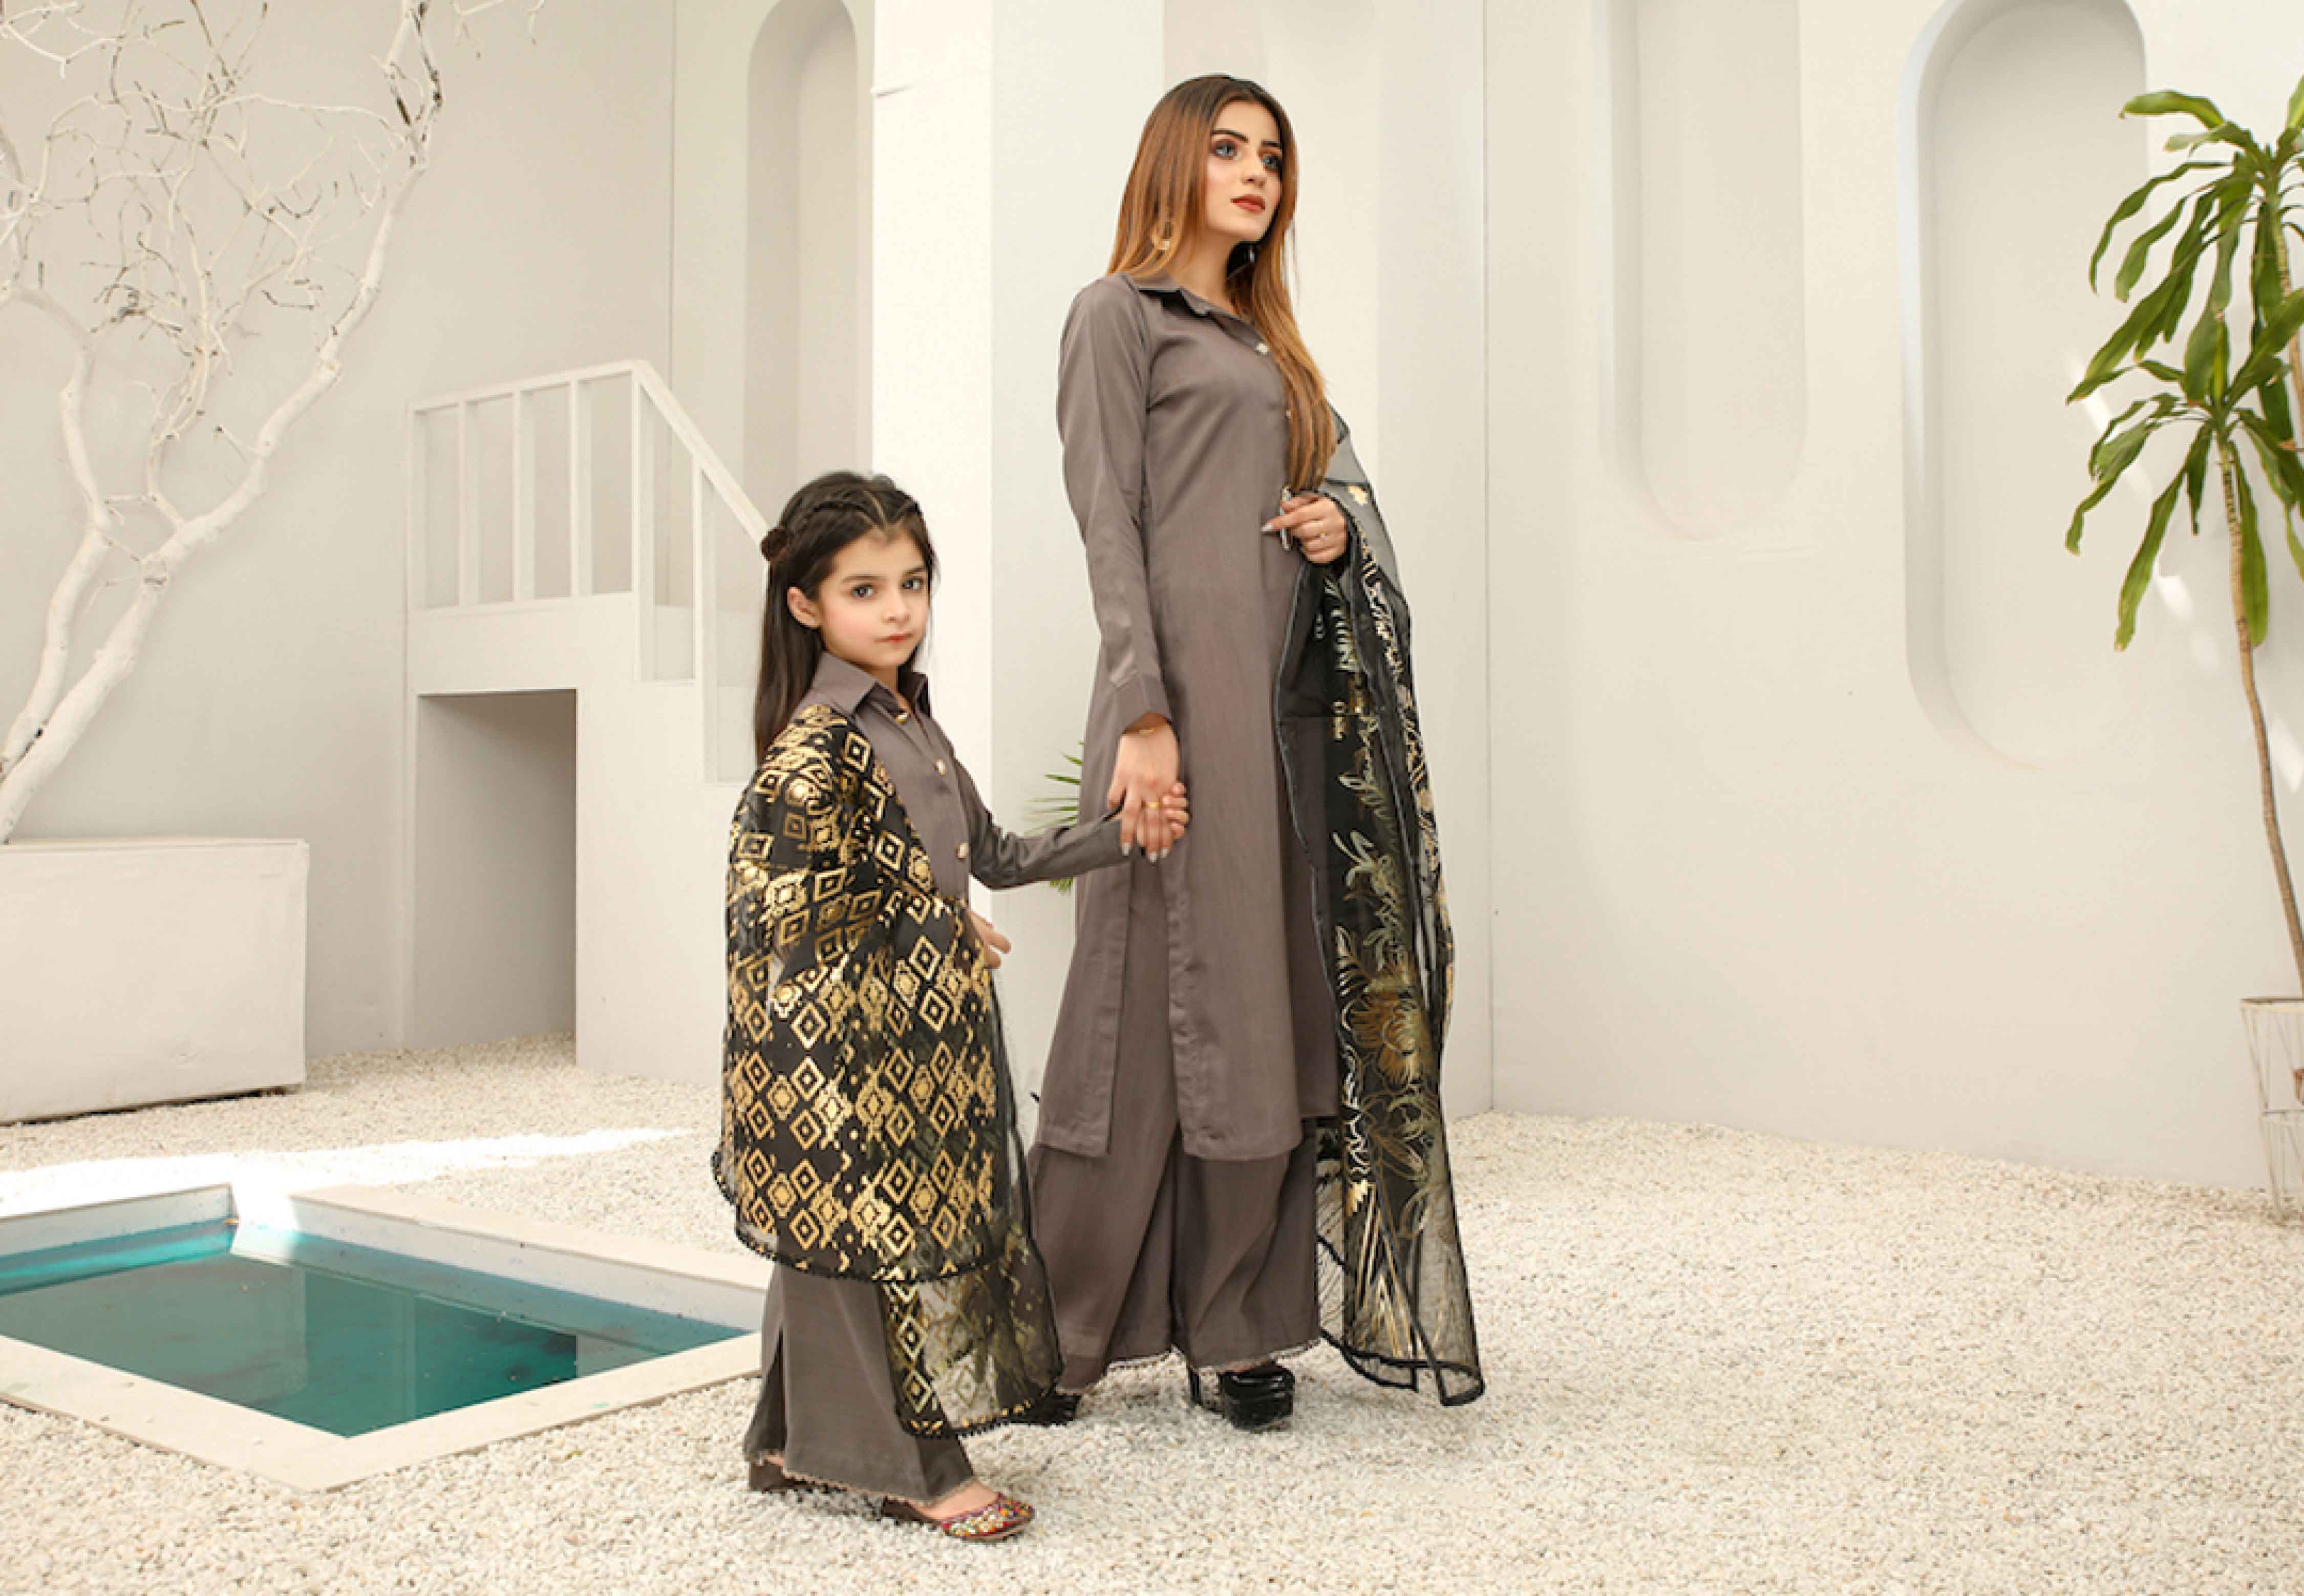 mother and daughter eid collection